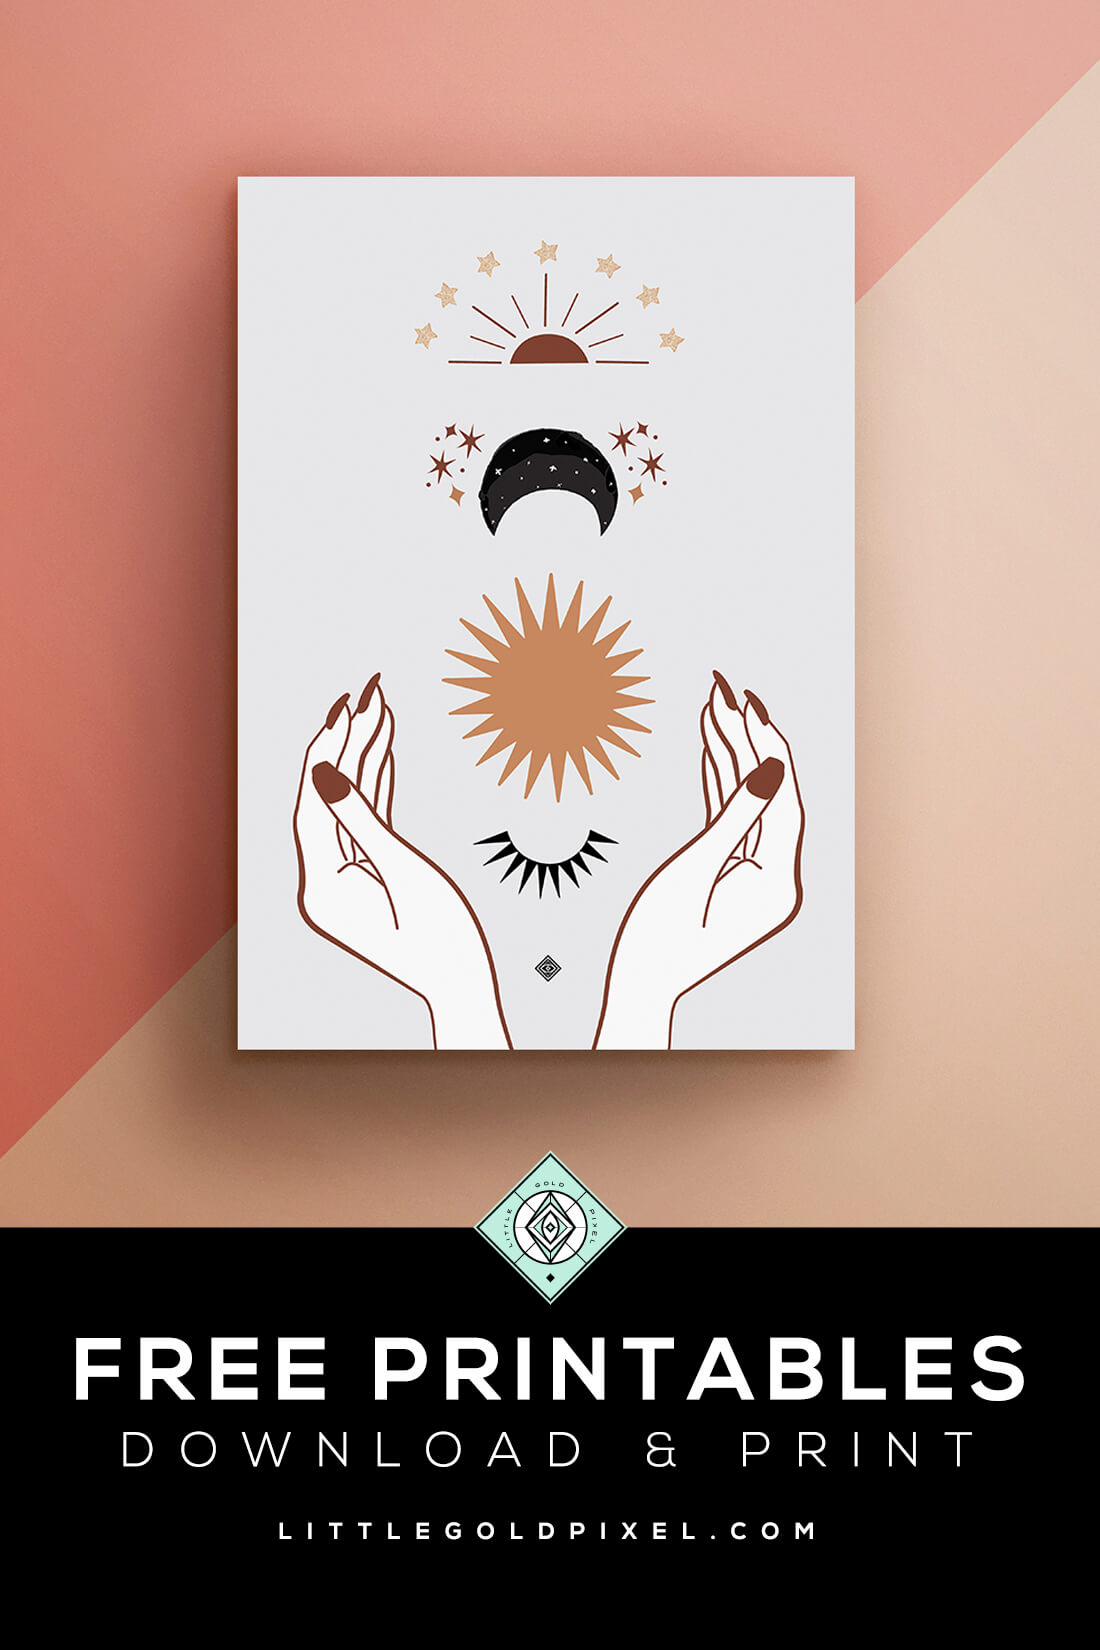 Free Magical Art Printable • Little Gold Pixel • Freebie Friday #freebie #freeart #artprintable #printable #freedownload #mystical #celestial #magical #witchy